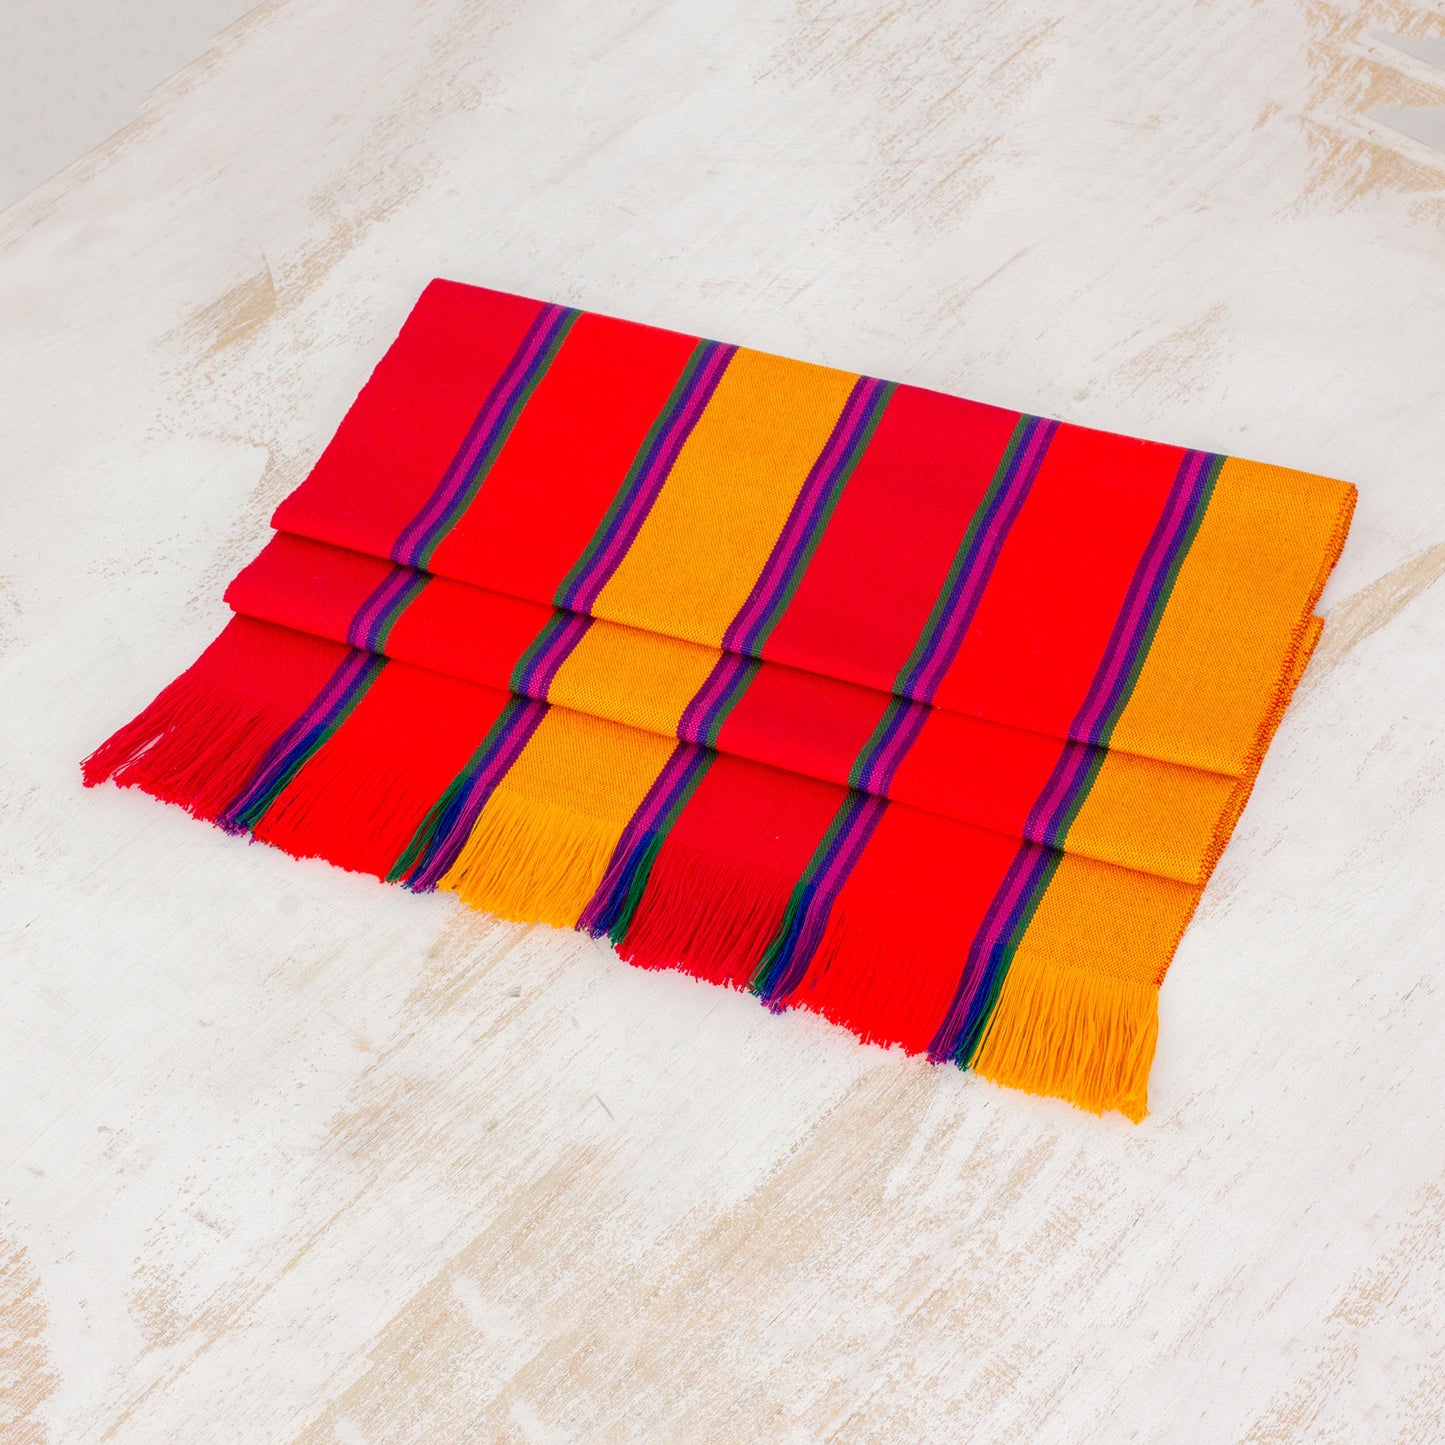 Sunset Glory Multicolor Striped Cotton Table Runner from Guatemala